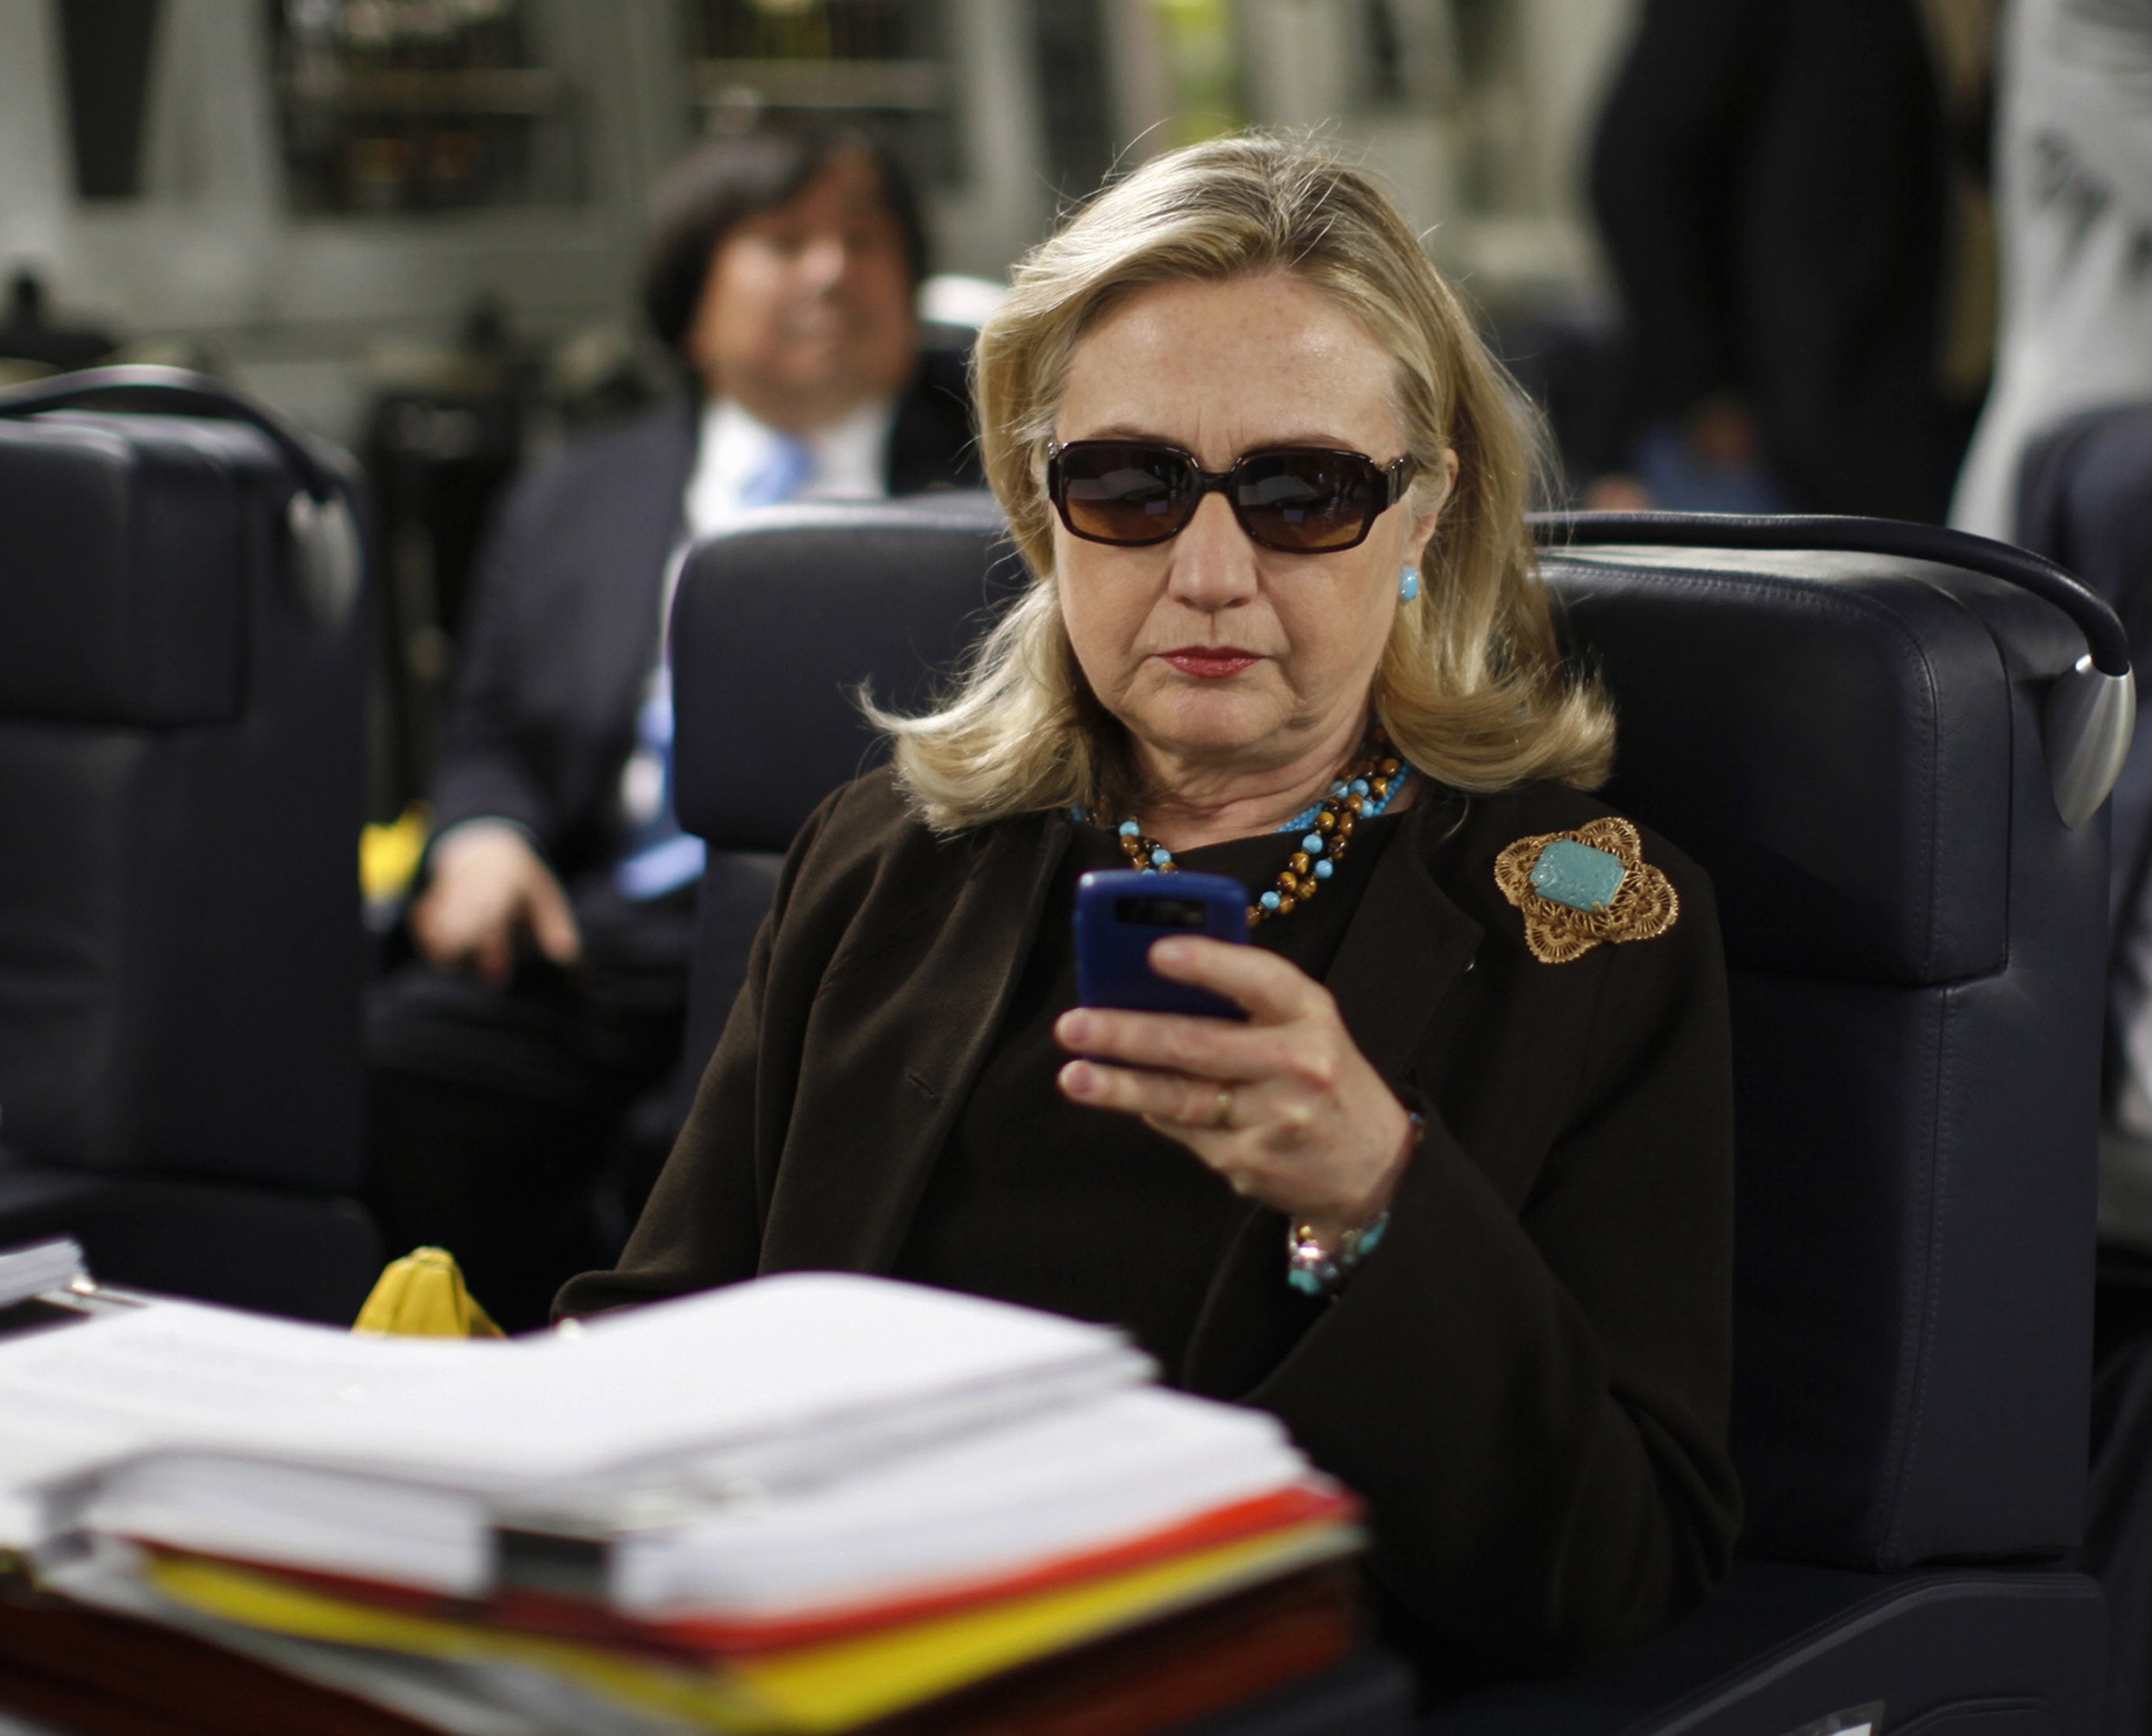 FILE - In this Oct. 18, 2011, file photo, then-Secretary of State Hillary Rodham Clinton checks her Blackberry from a desk inside a C-17 military plane upon her departure from Malta, in the Mediterranean Sea, bound for Tripoli, Libya. Hillary Clintons work-related emails from her private account are now public, more than 52,000 pages detailing her tenure as Americas top diplomat but failing to resolve questions about how she and her closest aides handled classified information. Several investigations continue looking into her exclusive use of a non-government email account and homebrew server while in government, an issue that has dogged her campaign, even though she seems well-positioned to capture the Democratic presidential nomination.